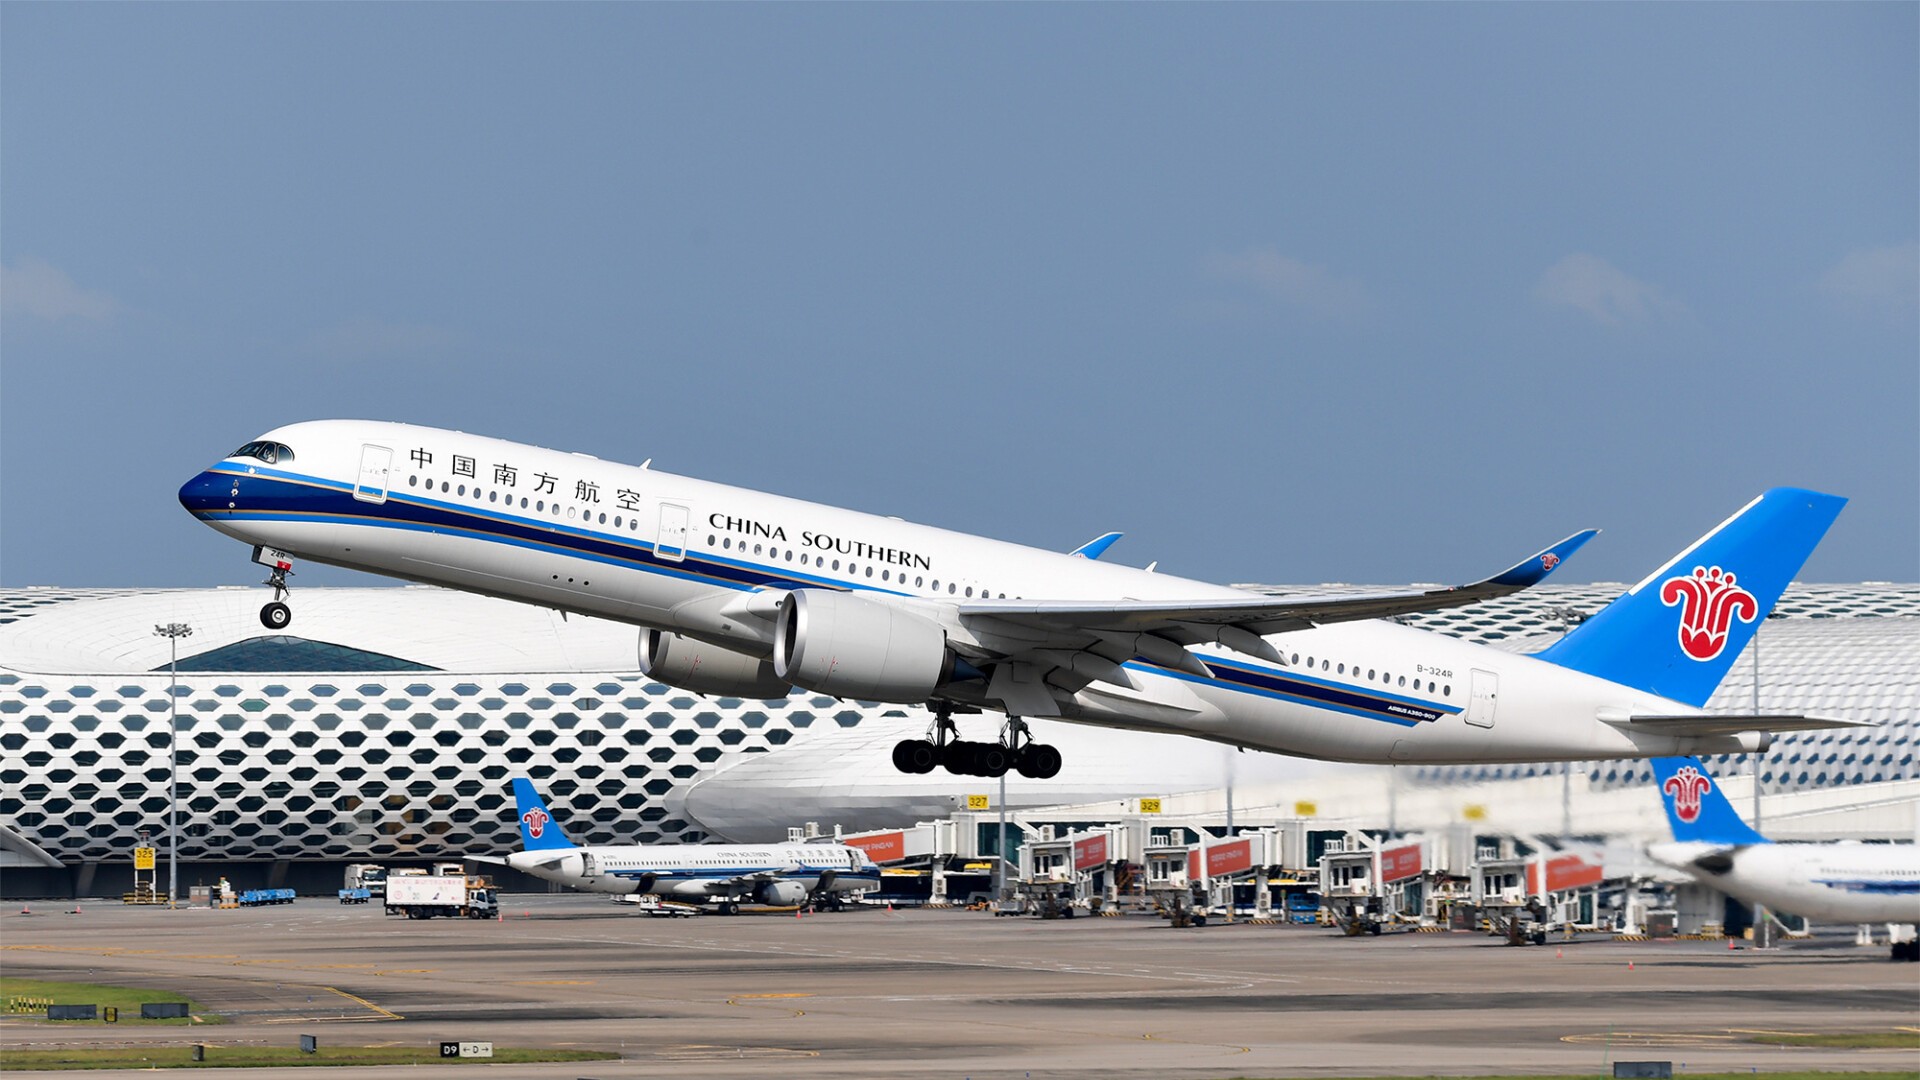 China Southern Airlines Guangzhou launches a red alert for large-scale flight delays